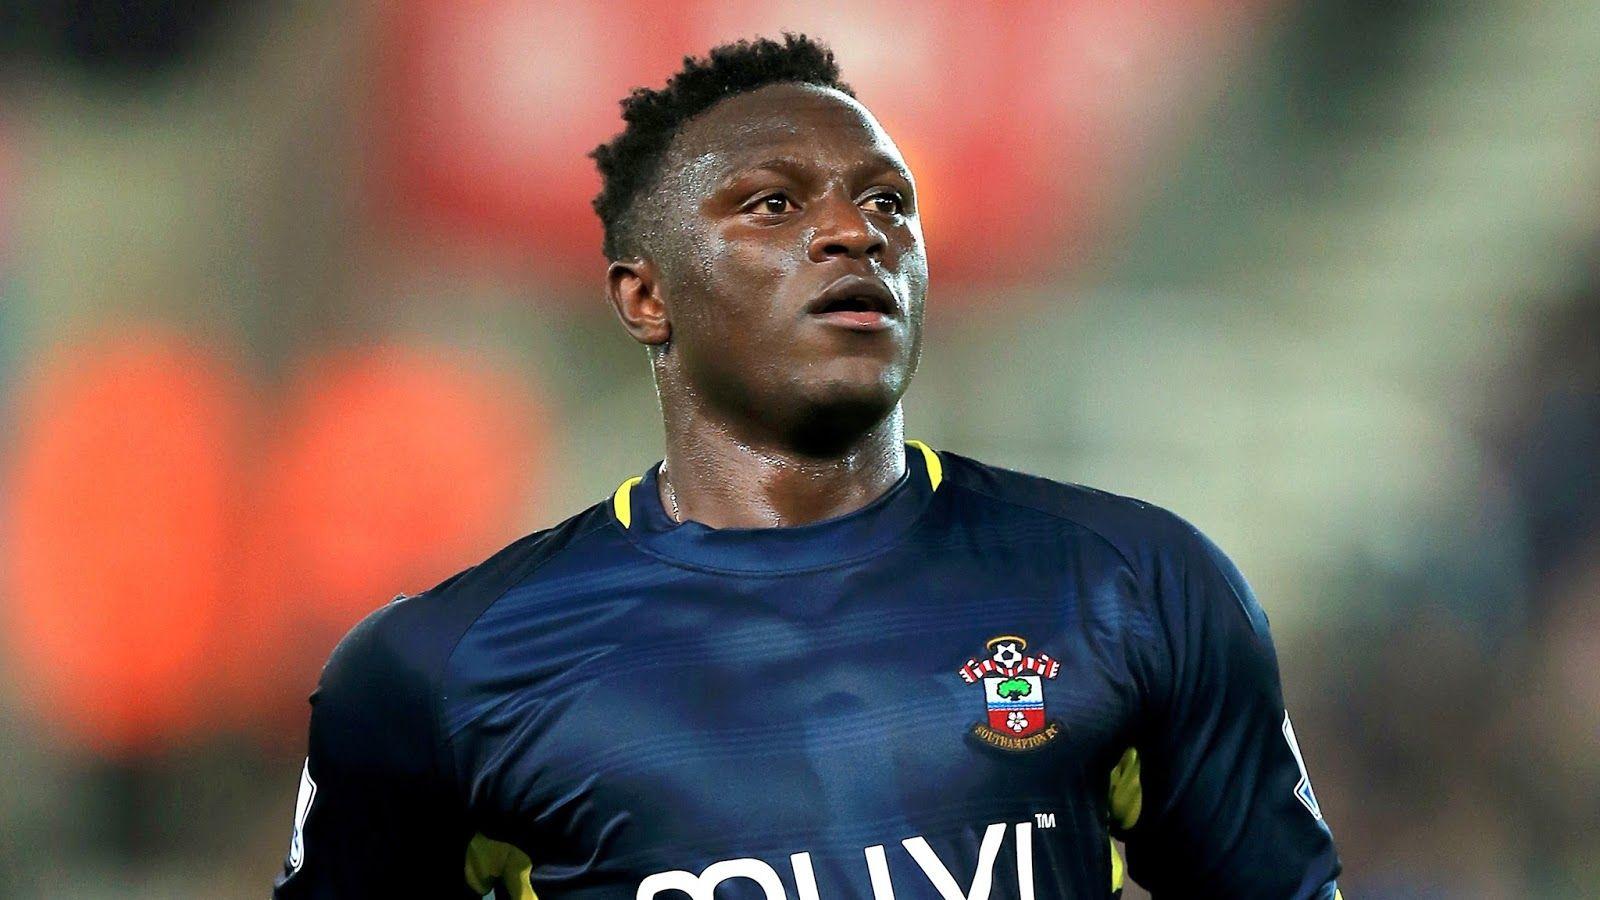 Soccer Royal: Leicester City To Sign Wanyama If Kante Leaves